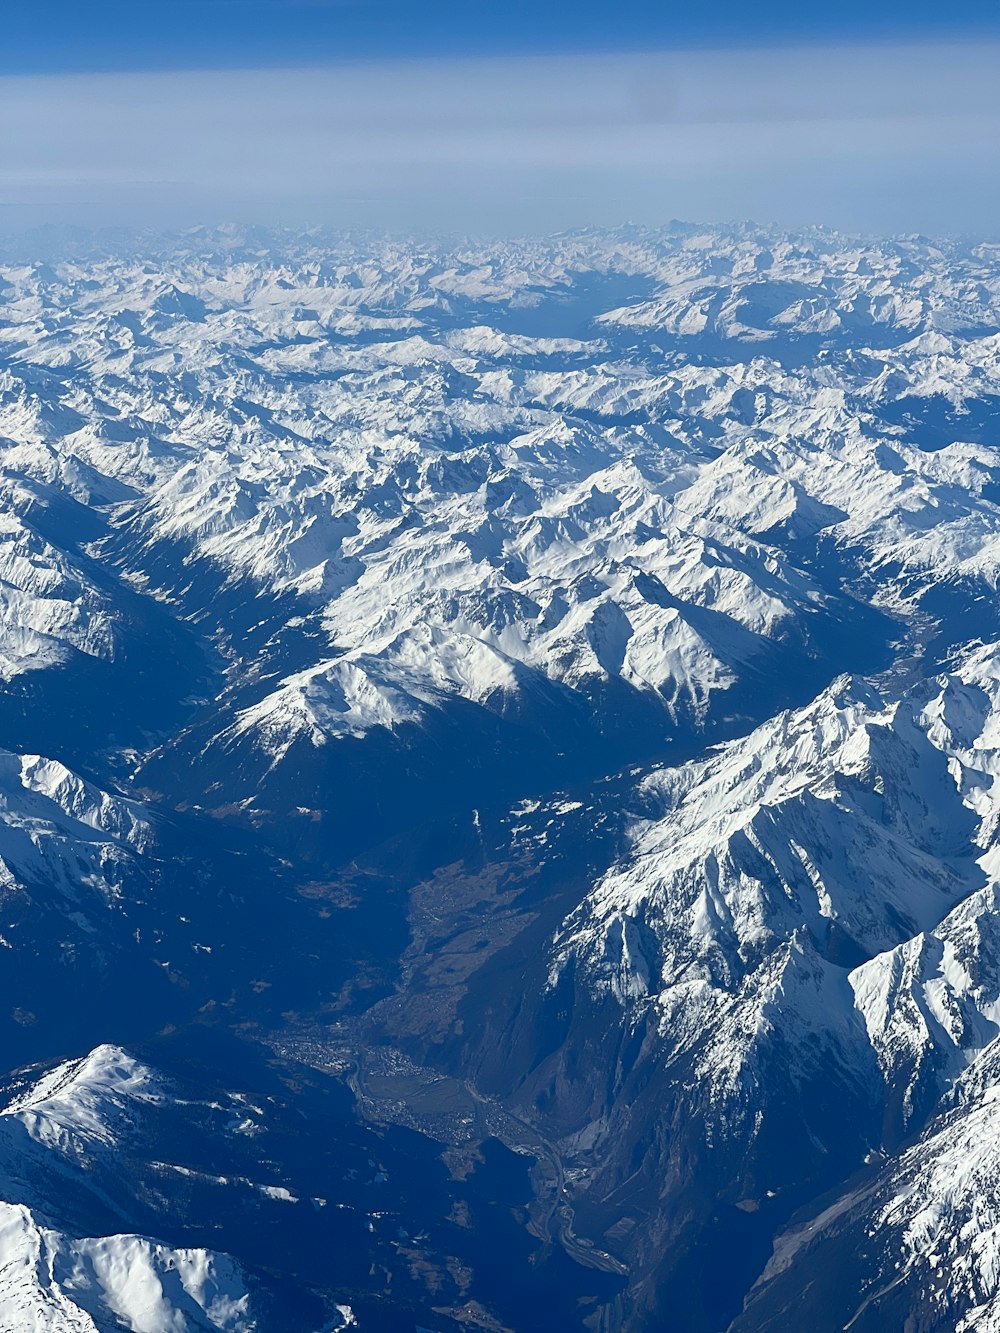 a view of the mountains from an airplane